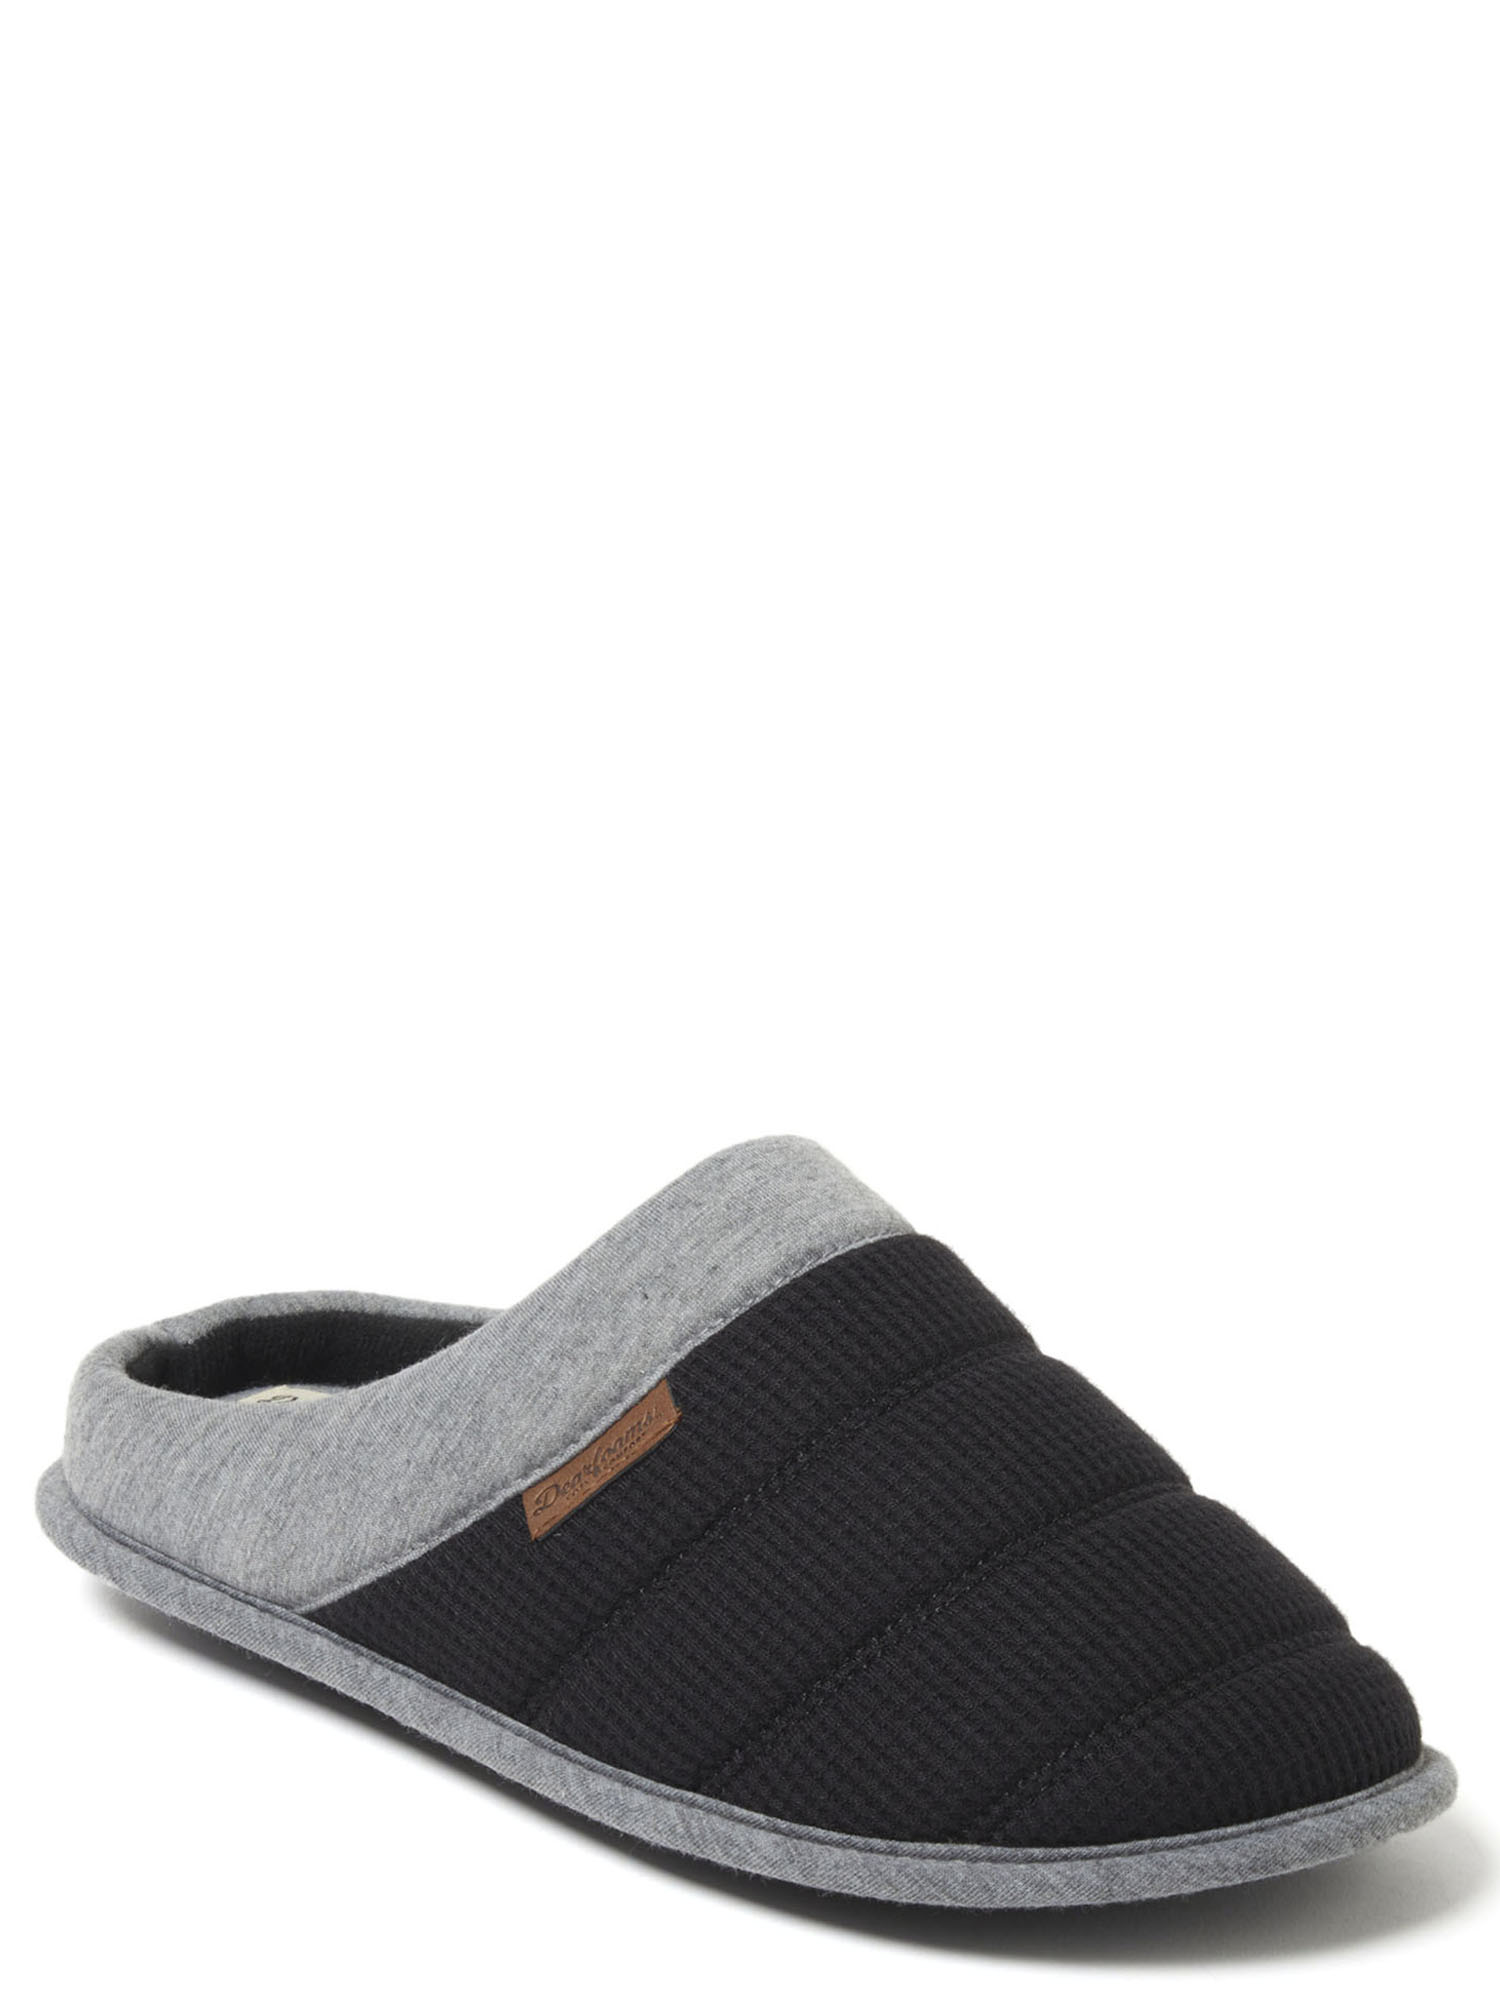 Dearfoams Cozy Comfort Men's Bound Knit Clog Slippers - image 5 of 5